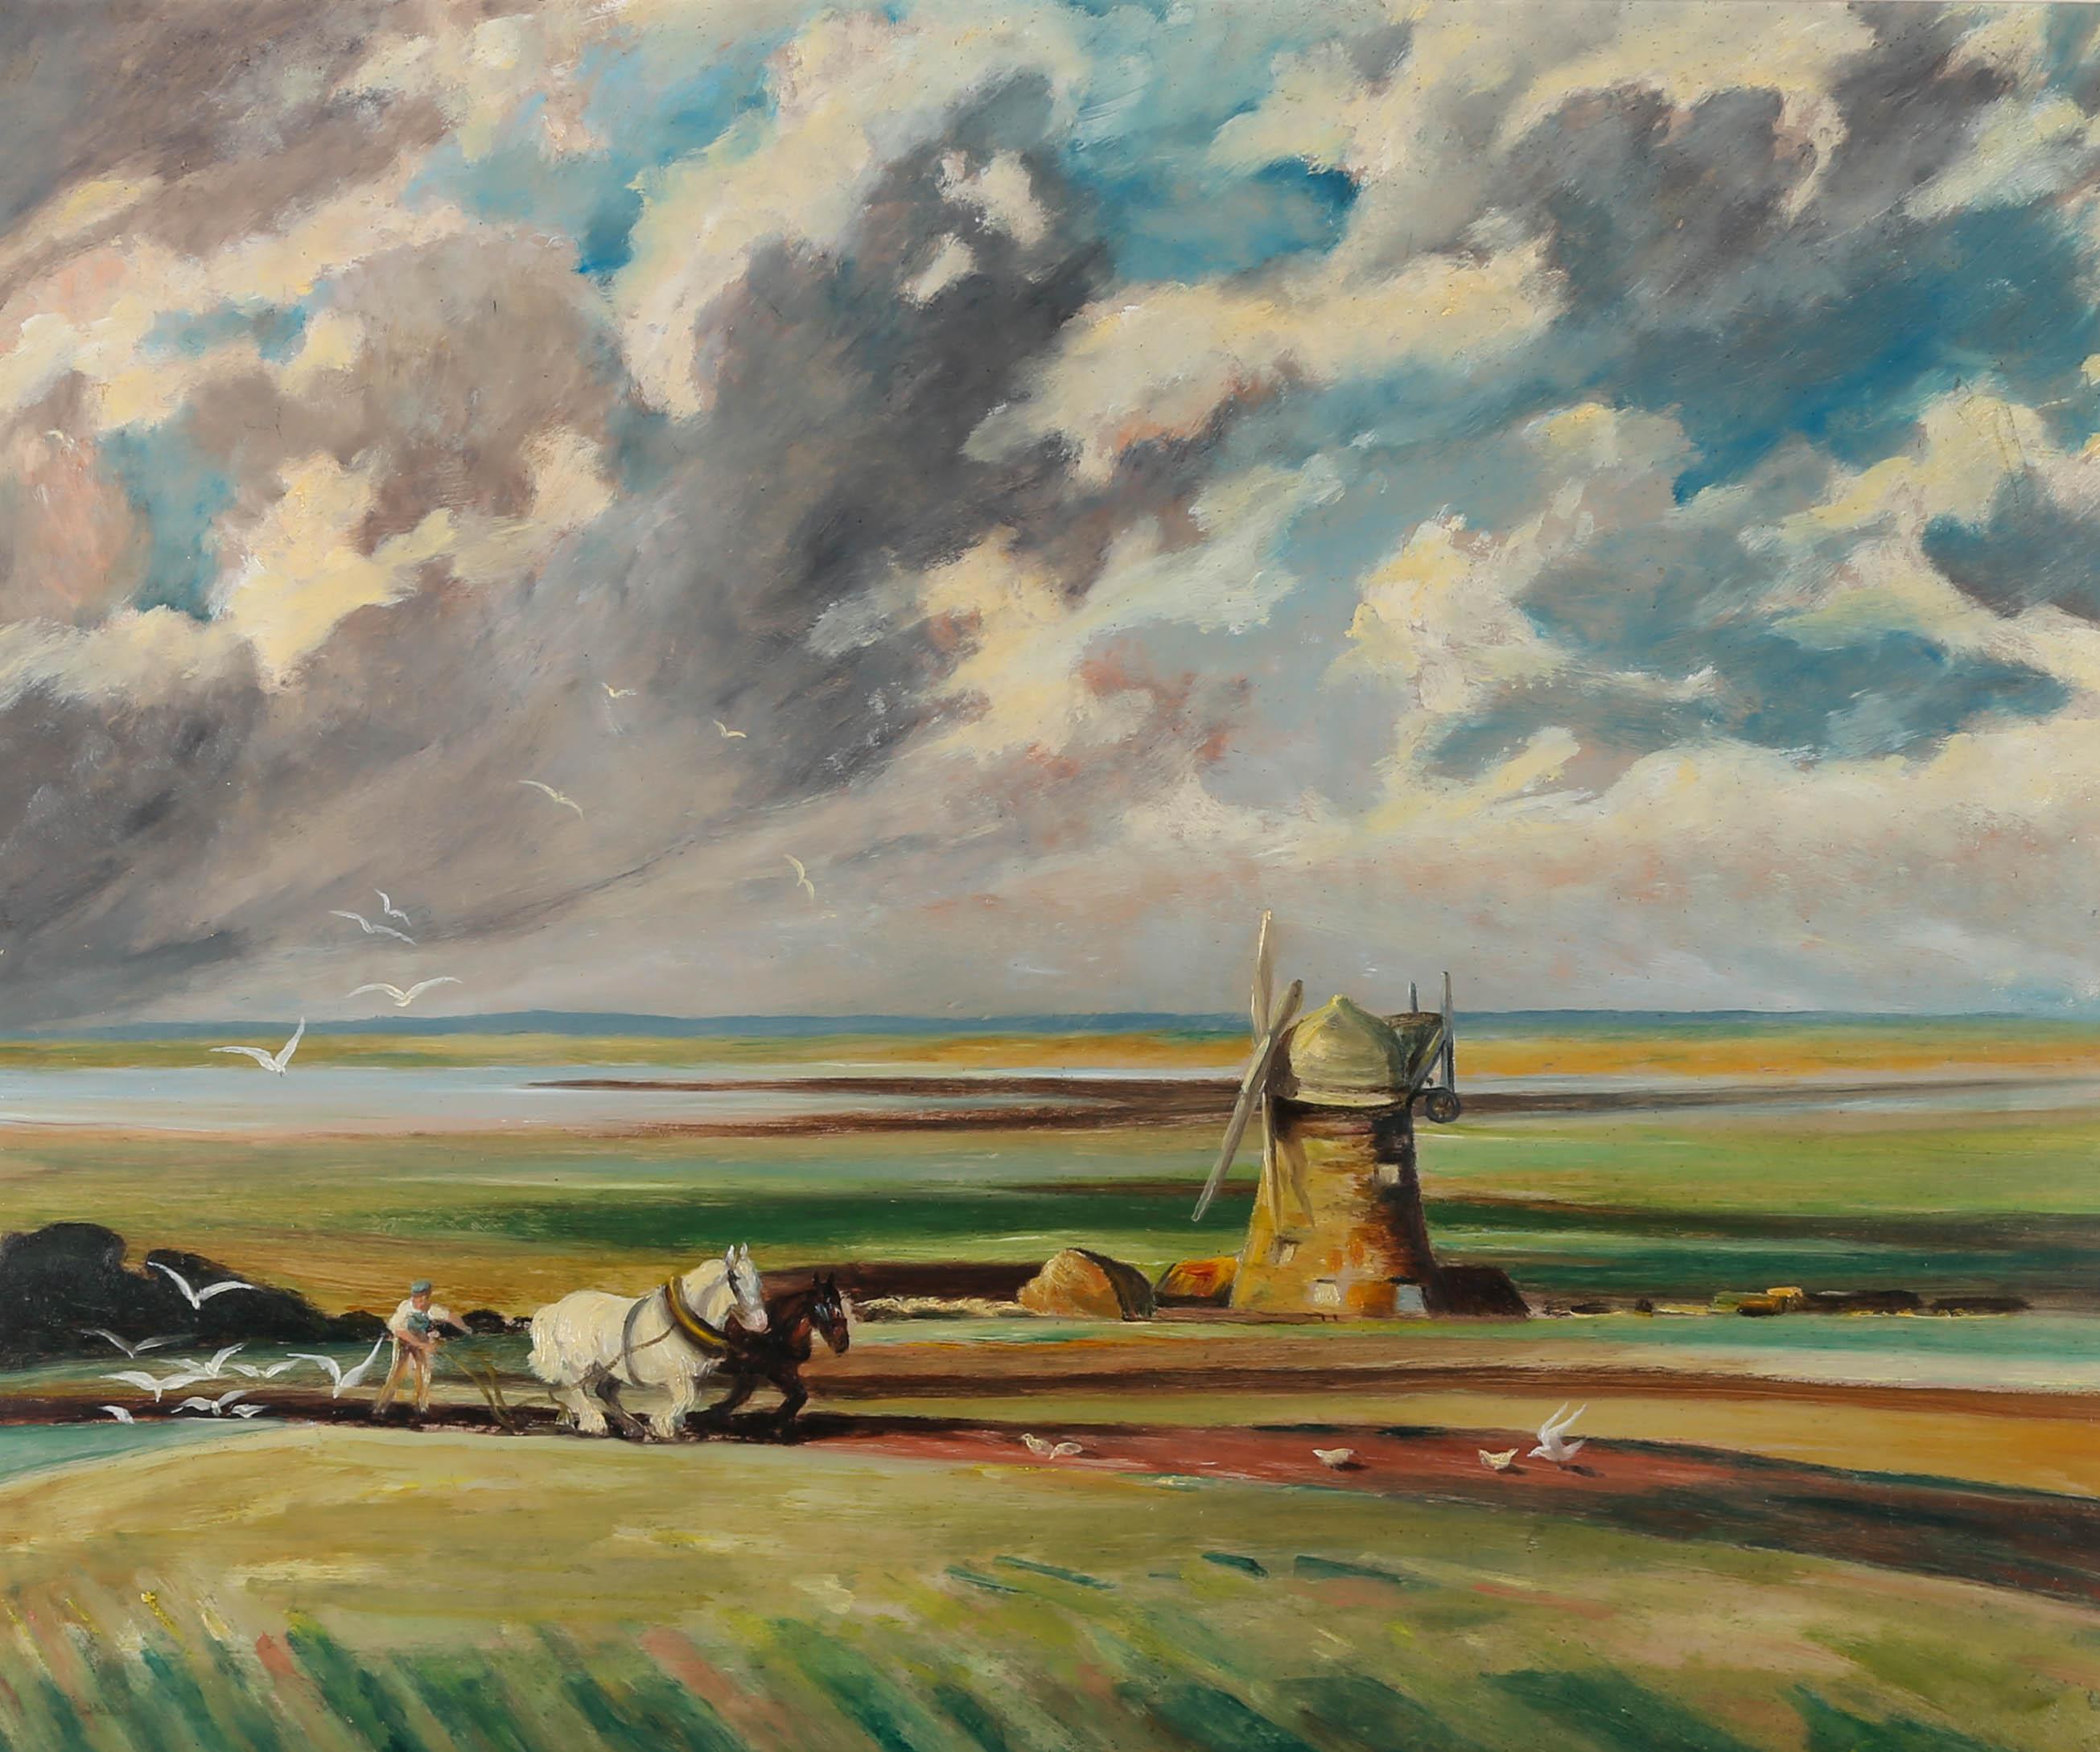 This delightful scene depicts a farmer and two shire horses ploughing a field. Seagulls swirl overhead before a stone windmill. The scene looks over a vast landscape, painted in a warm palette with hues of pink and orange worked into the cloudy sky.